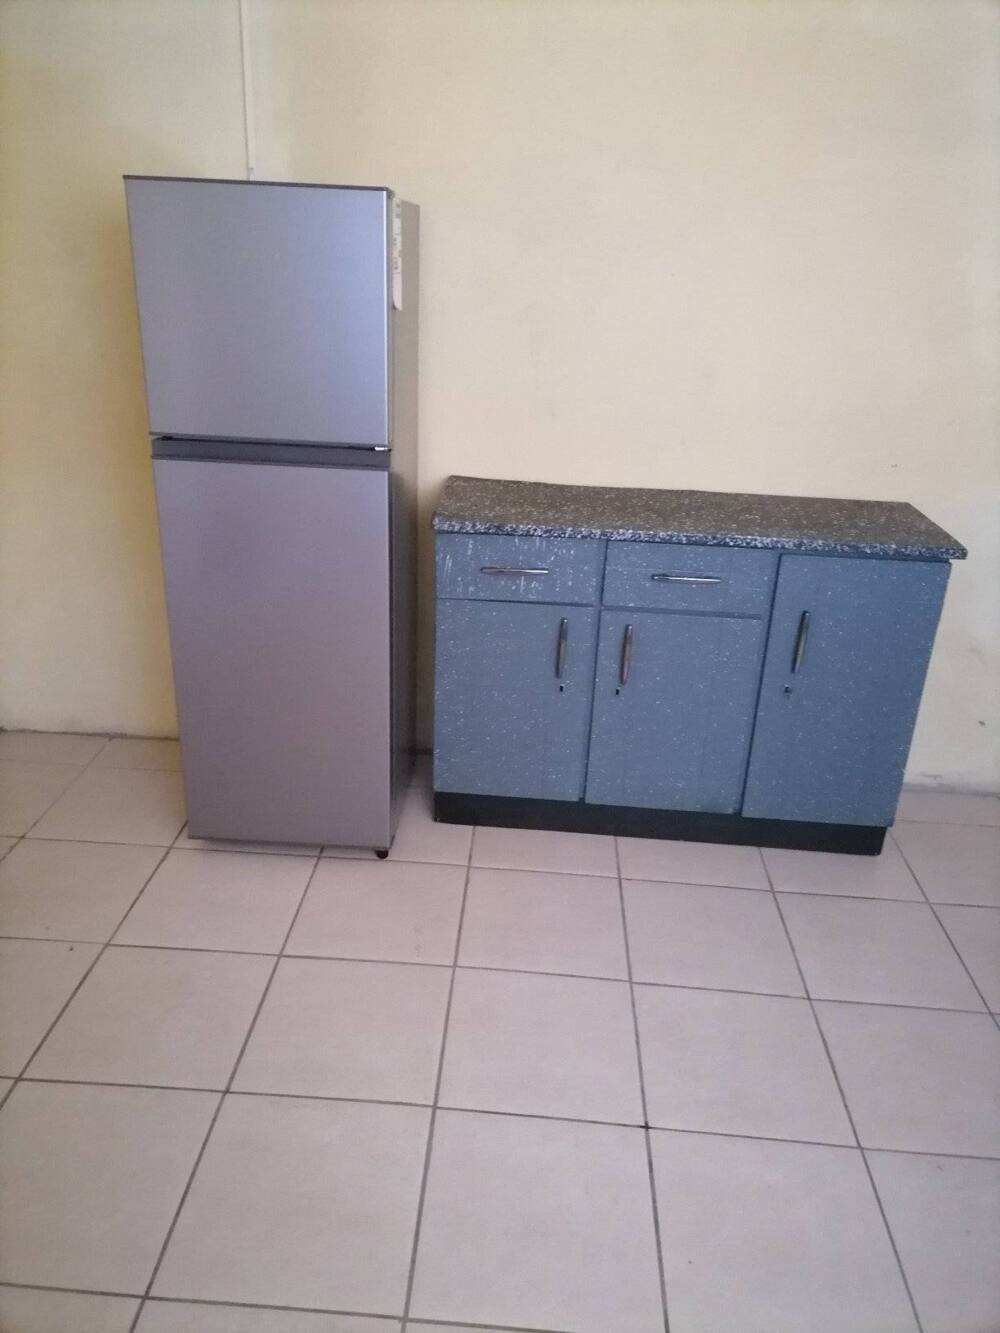 KZN lady shows off her kitchen space.